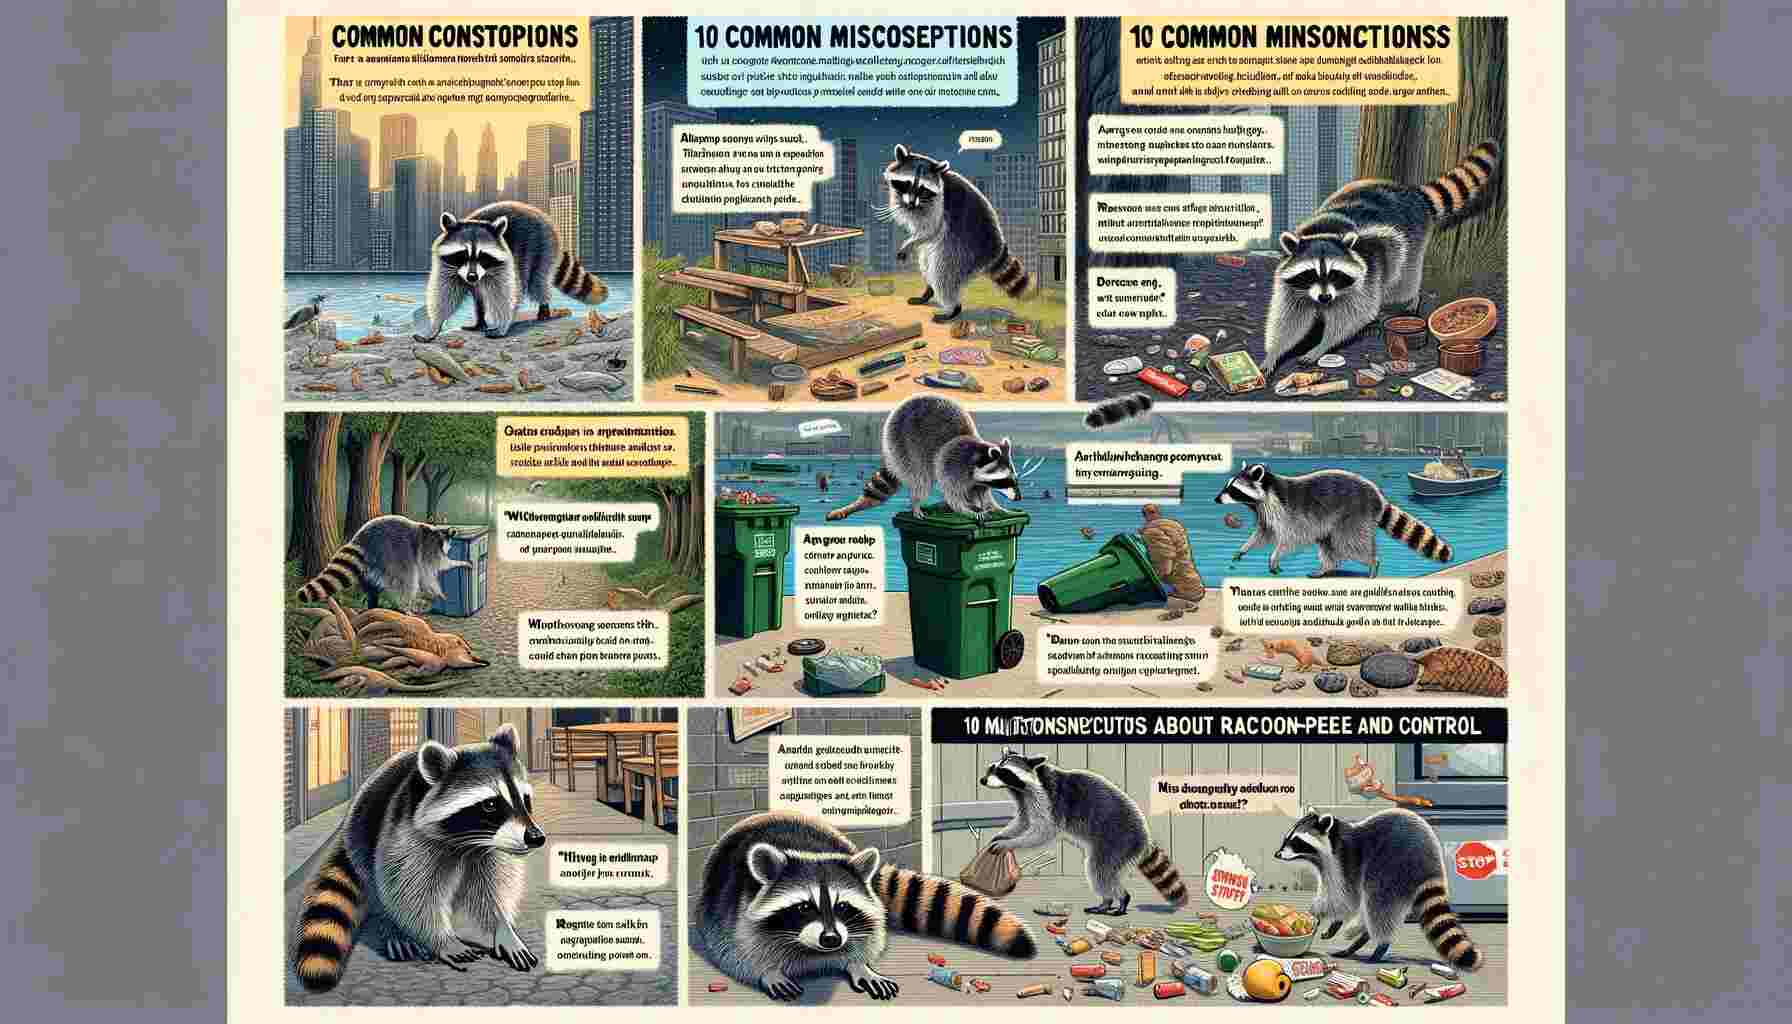 The image provides a visual representation of '10 Common Misconceptions About Raccoon Behavior and Control,' featuring various scenarios that debunk these myths.